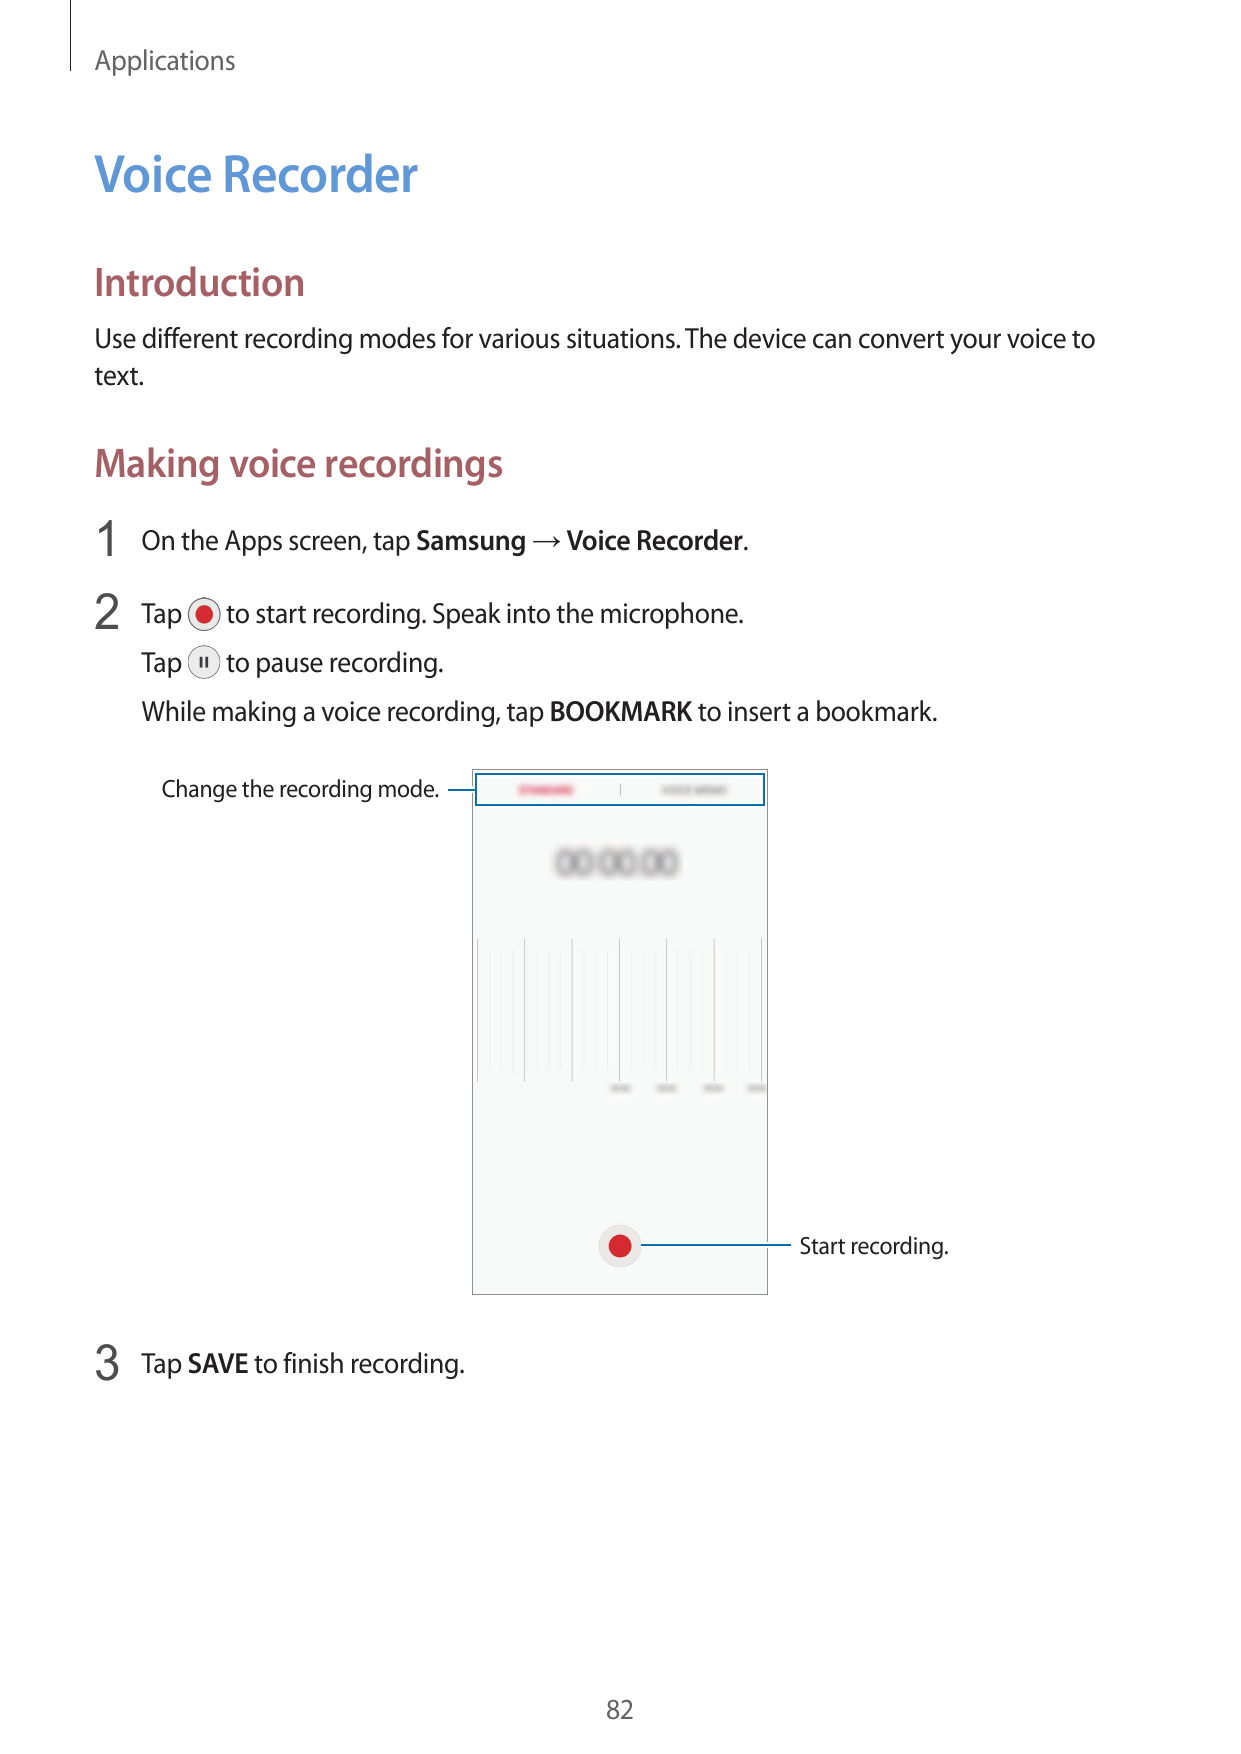 ApplicationsVoice RecorderIntroductionUse different recording modes for various situations. The device can convert your voice to